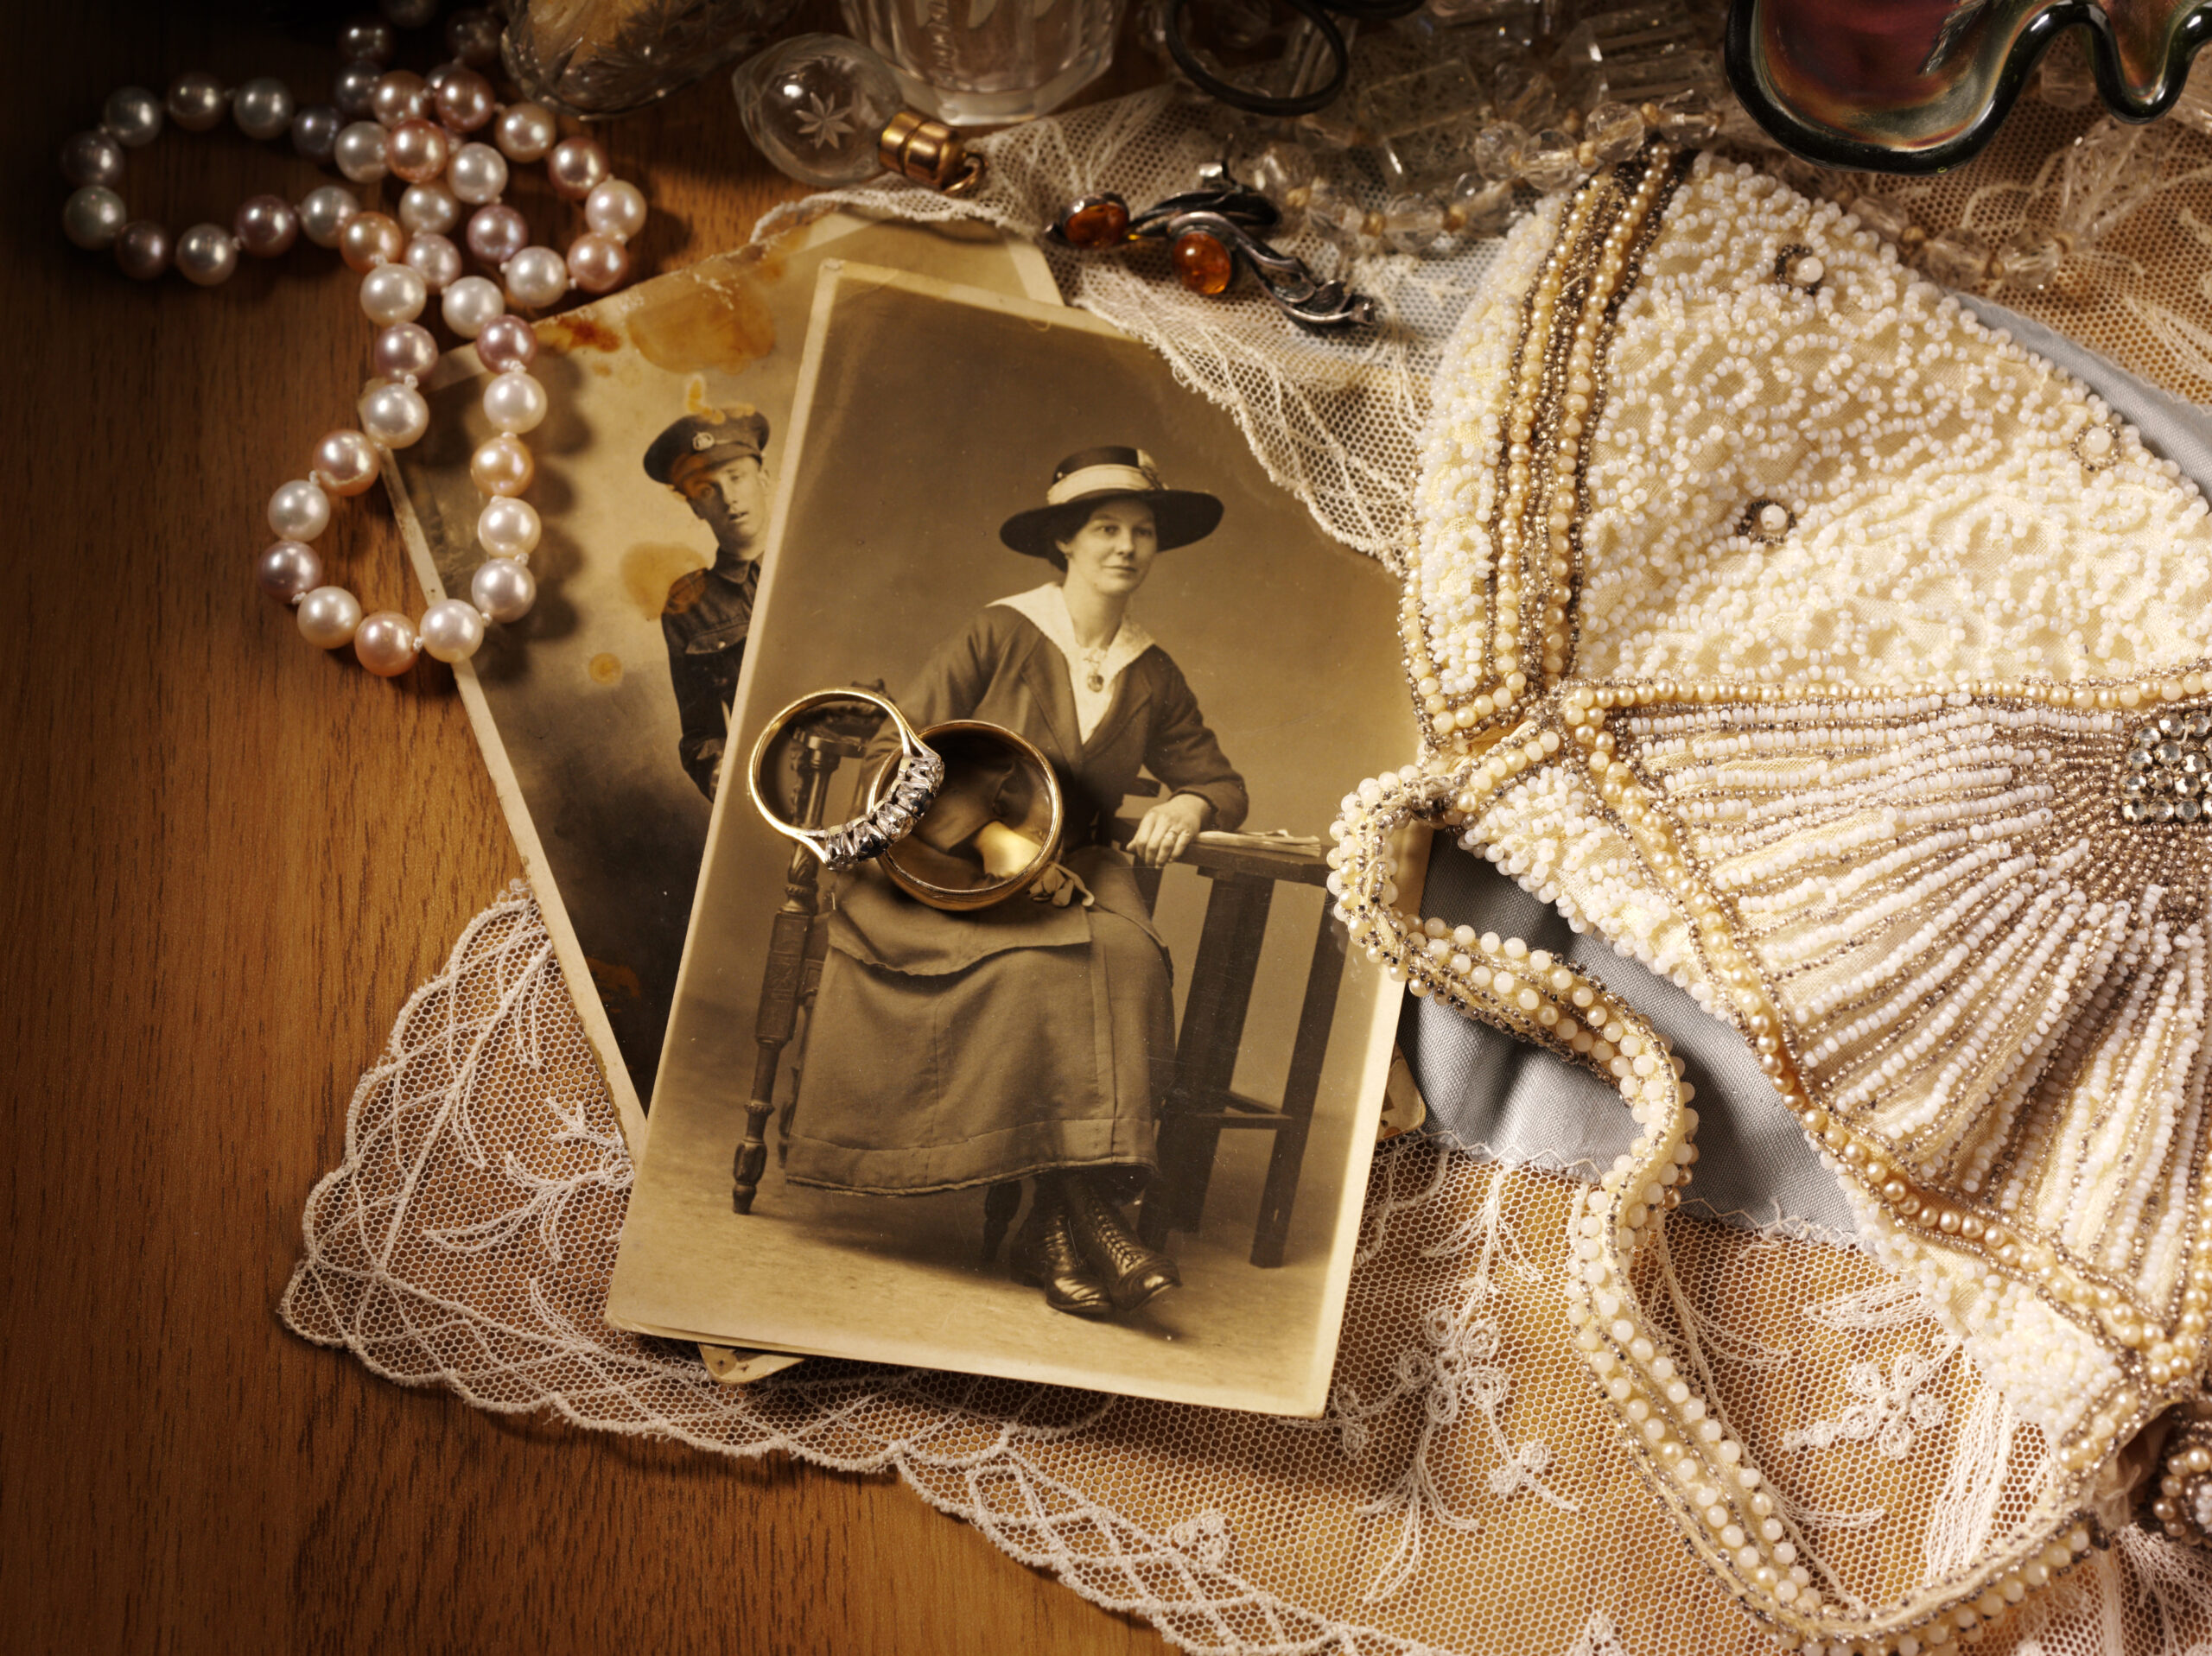 Antiques and collectables with photographs of a soldier and his wife.Click on the link below to see more of my antiques and collectable images.